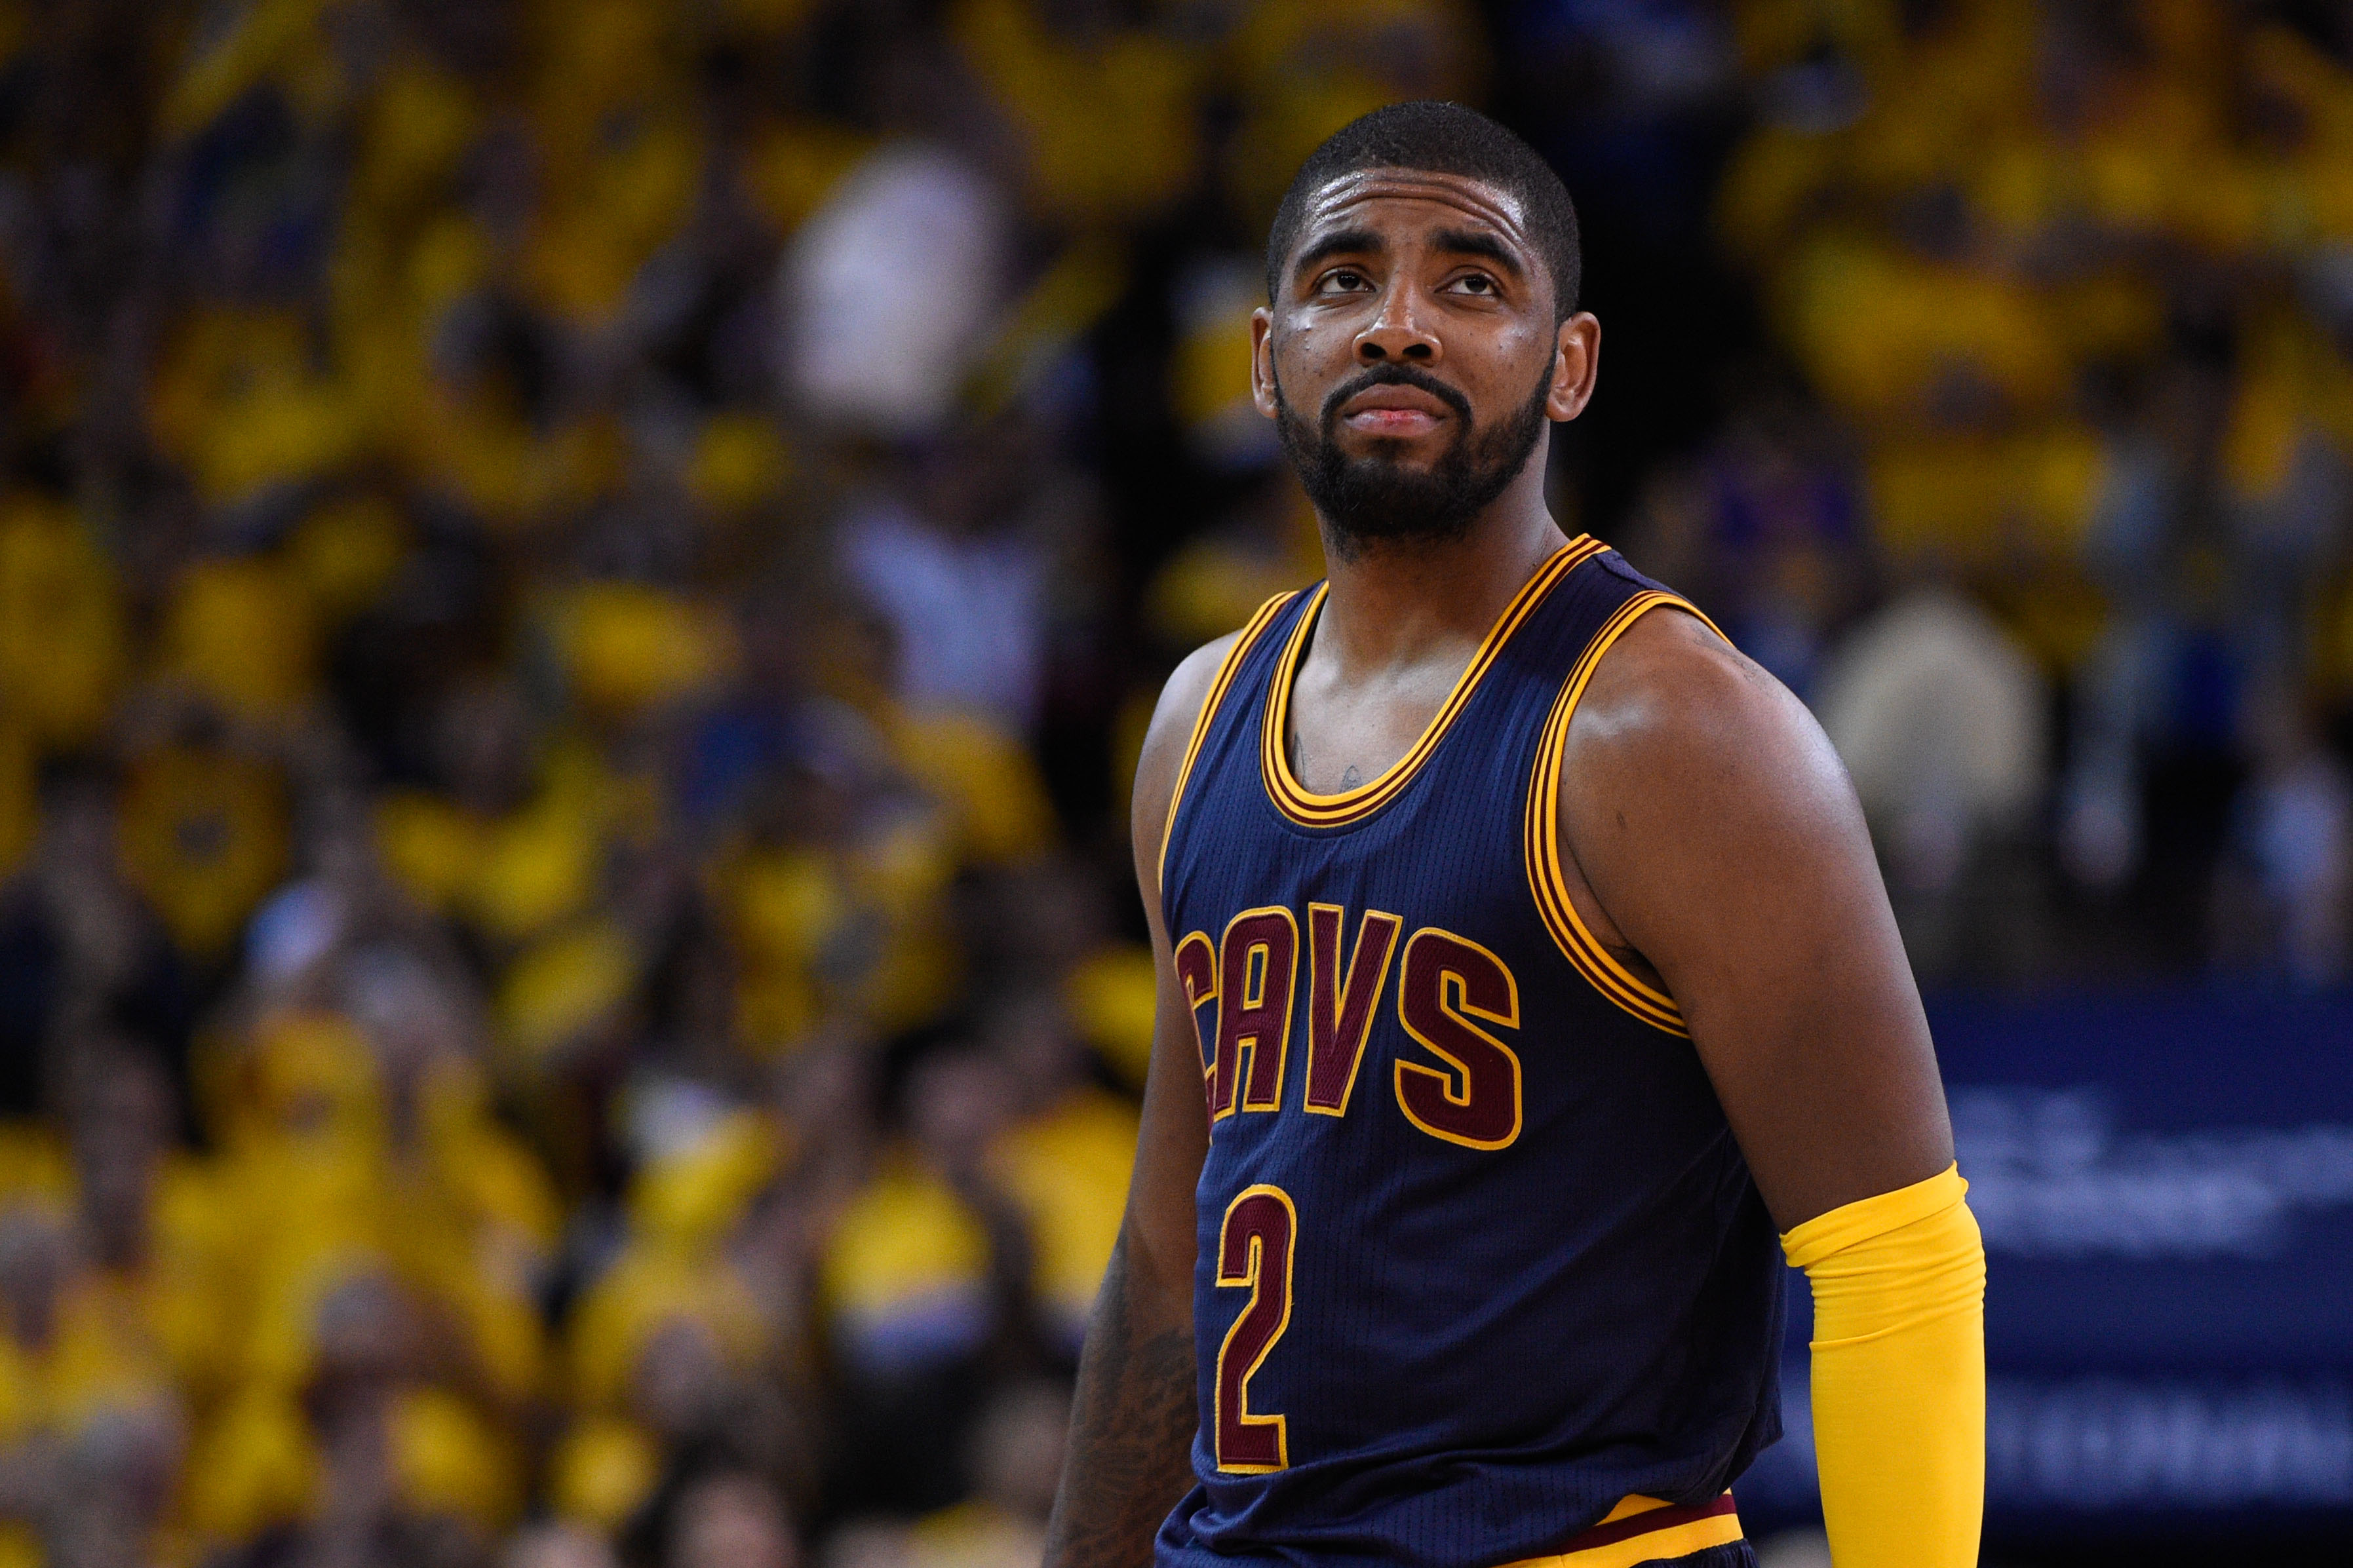 Kyrie Irving #20